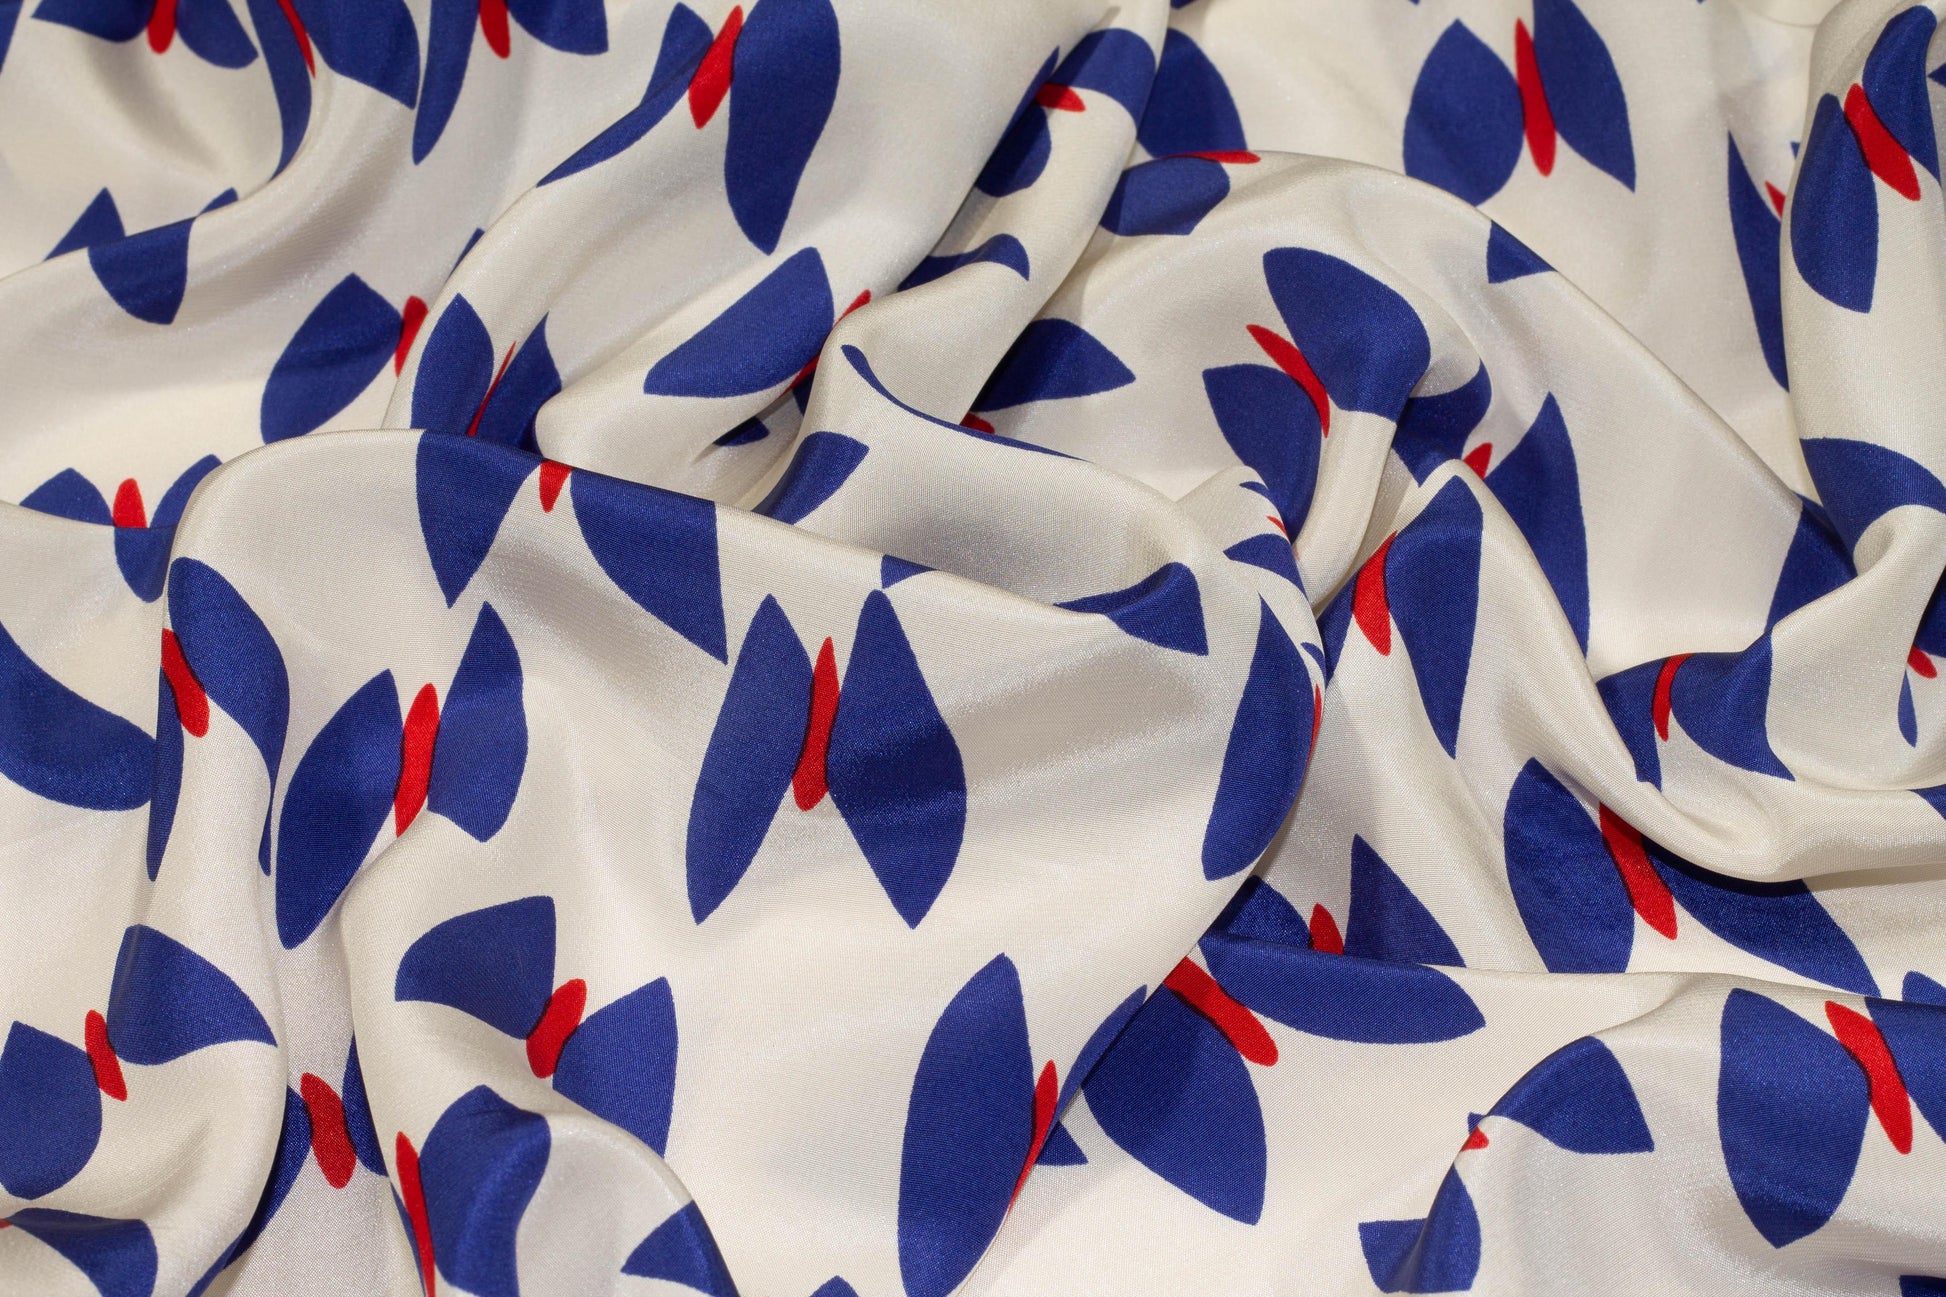 Butterfly Silk Crepe De Chine - Blue, Red, Off White - Prime Fabrics